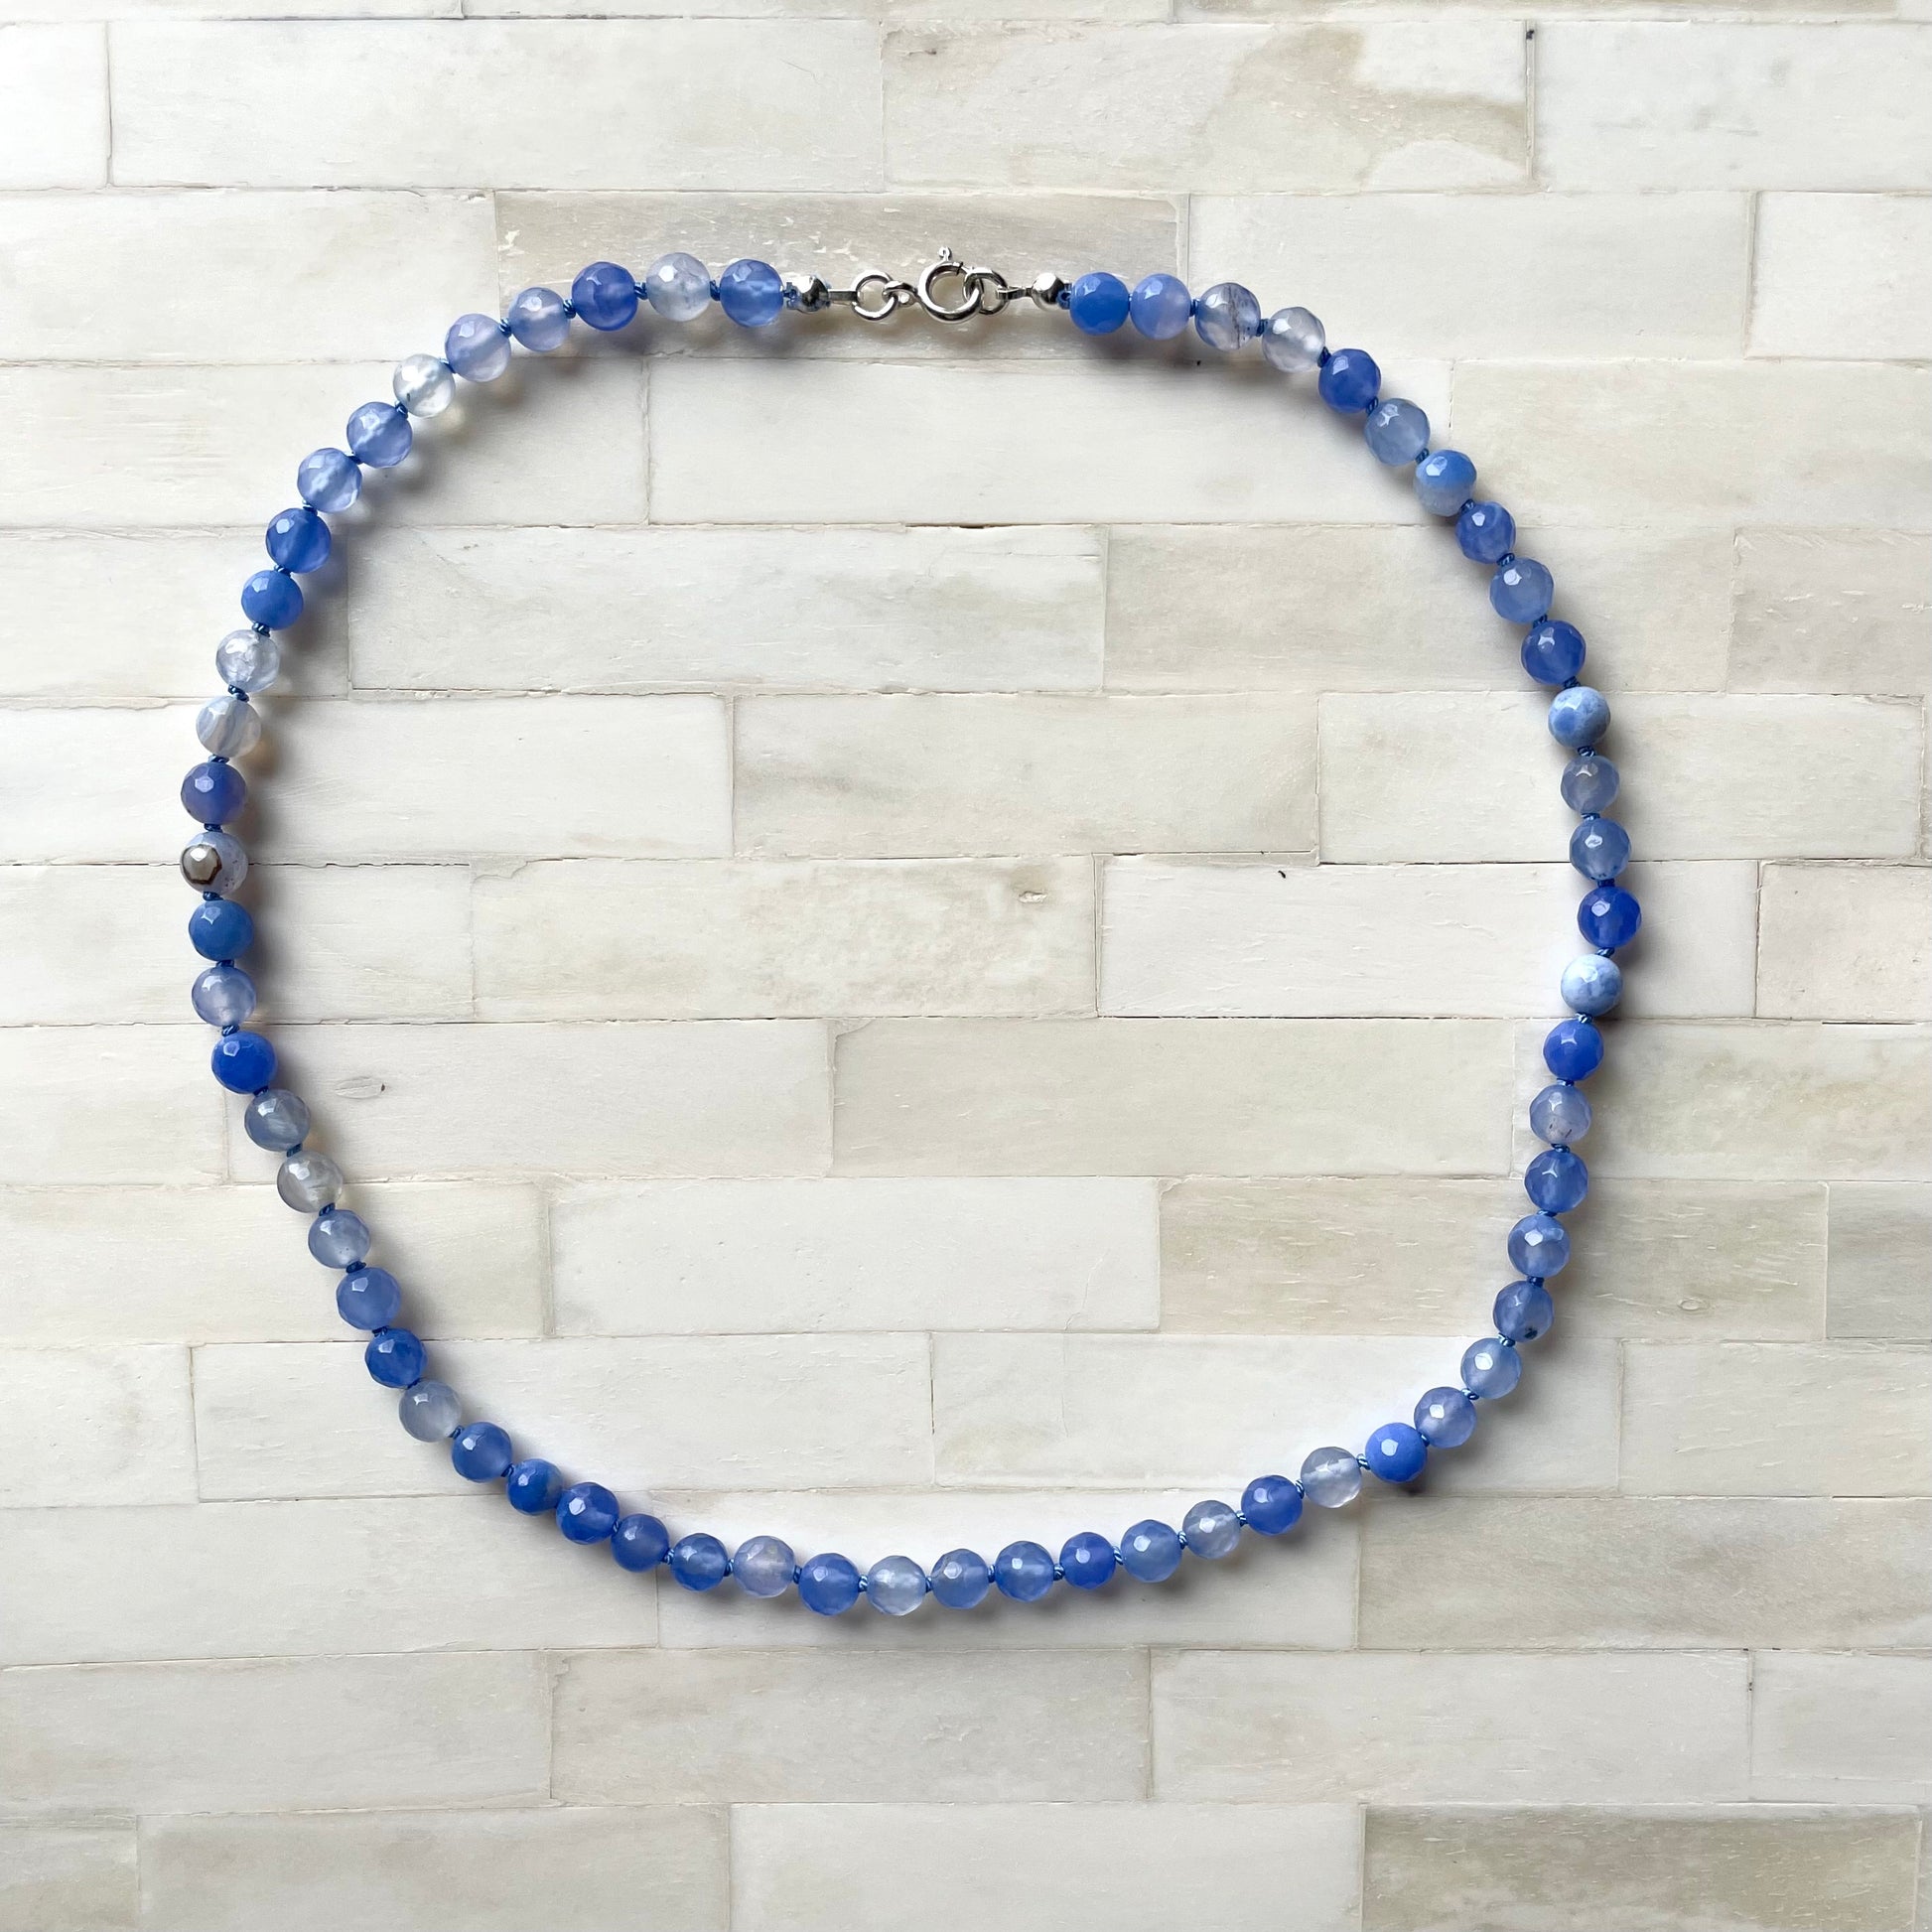 Blue stone necklace by Wallis Designs. Hand knotted on silk thread. Made in Canada.